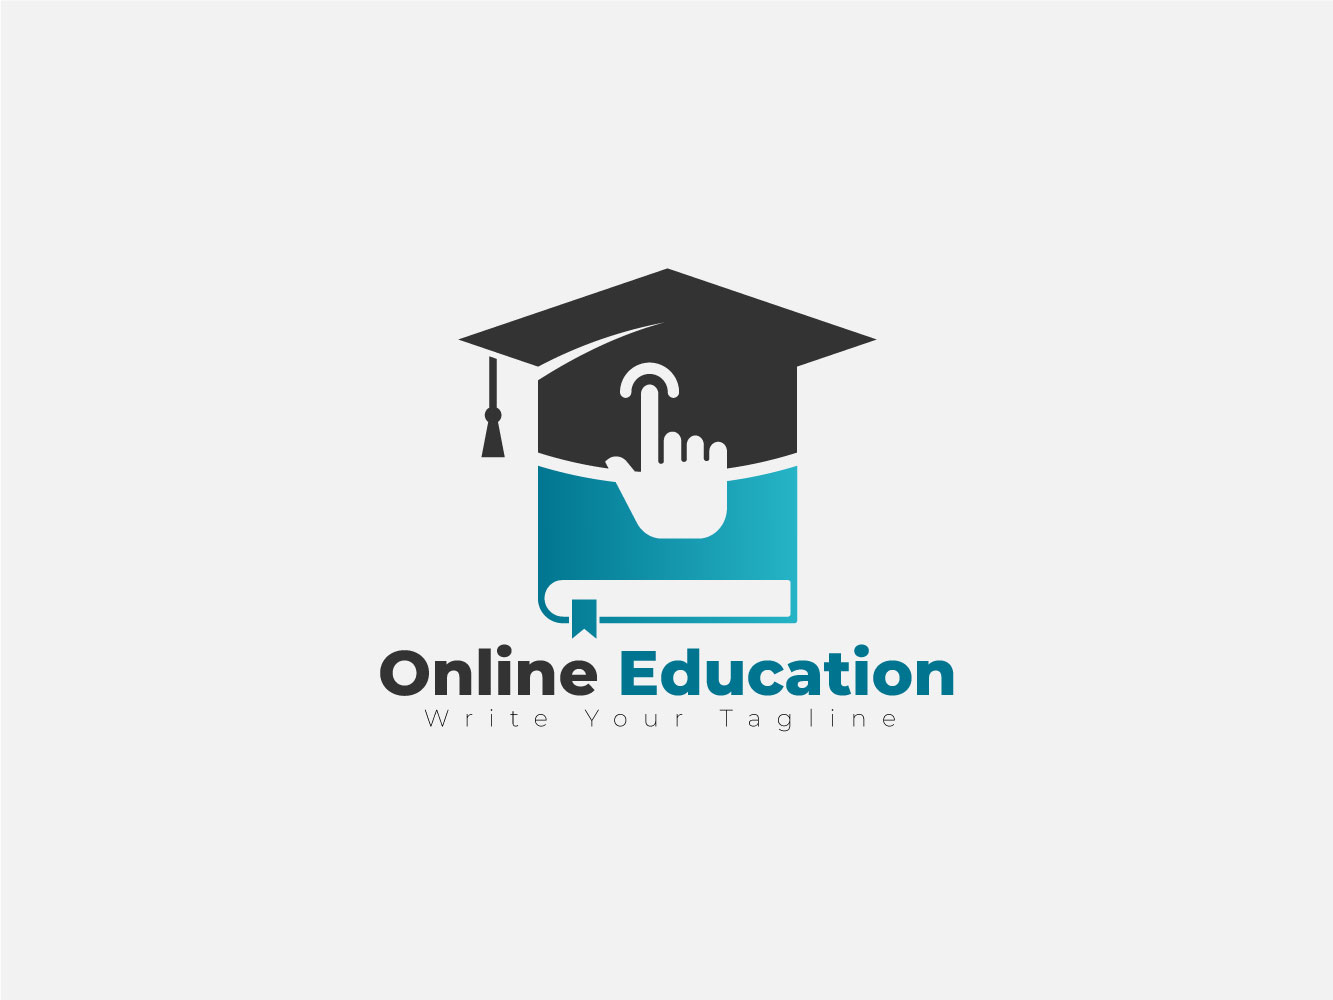 Online Education Logo Design With Book, Cap, And Hand Cursor